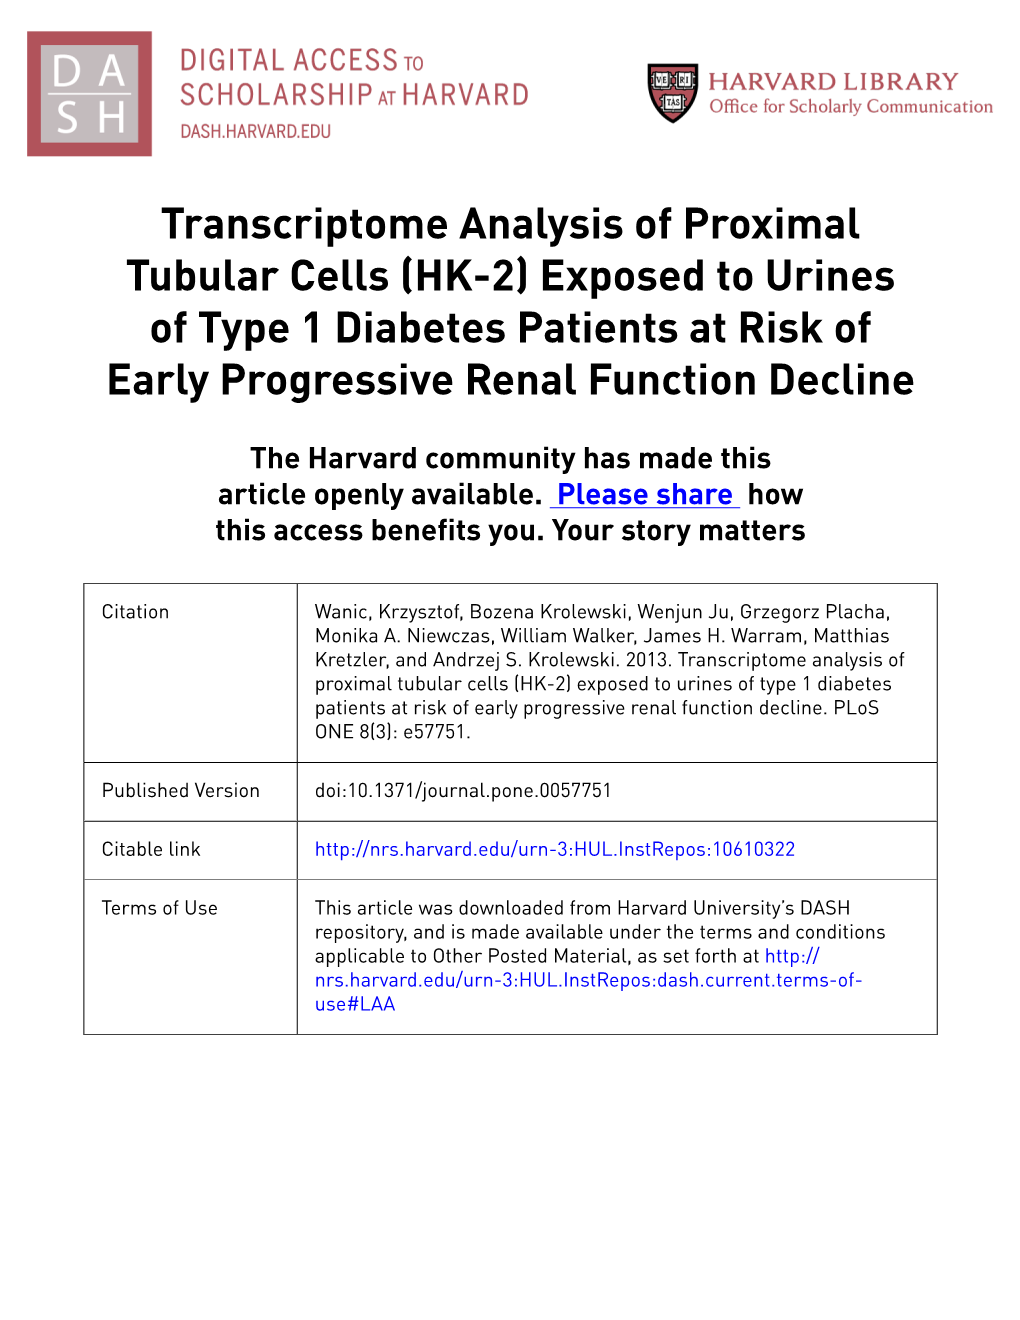 Transcriptome Analysis of Proximal Tubular Cells (HK-2) Exposed to Urines of Type 1 Diabetes Patients at Risk of Early Progressive Renal Function Decline